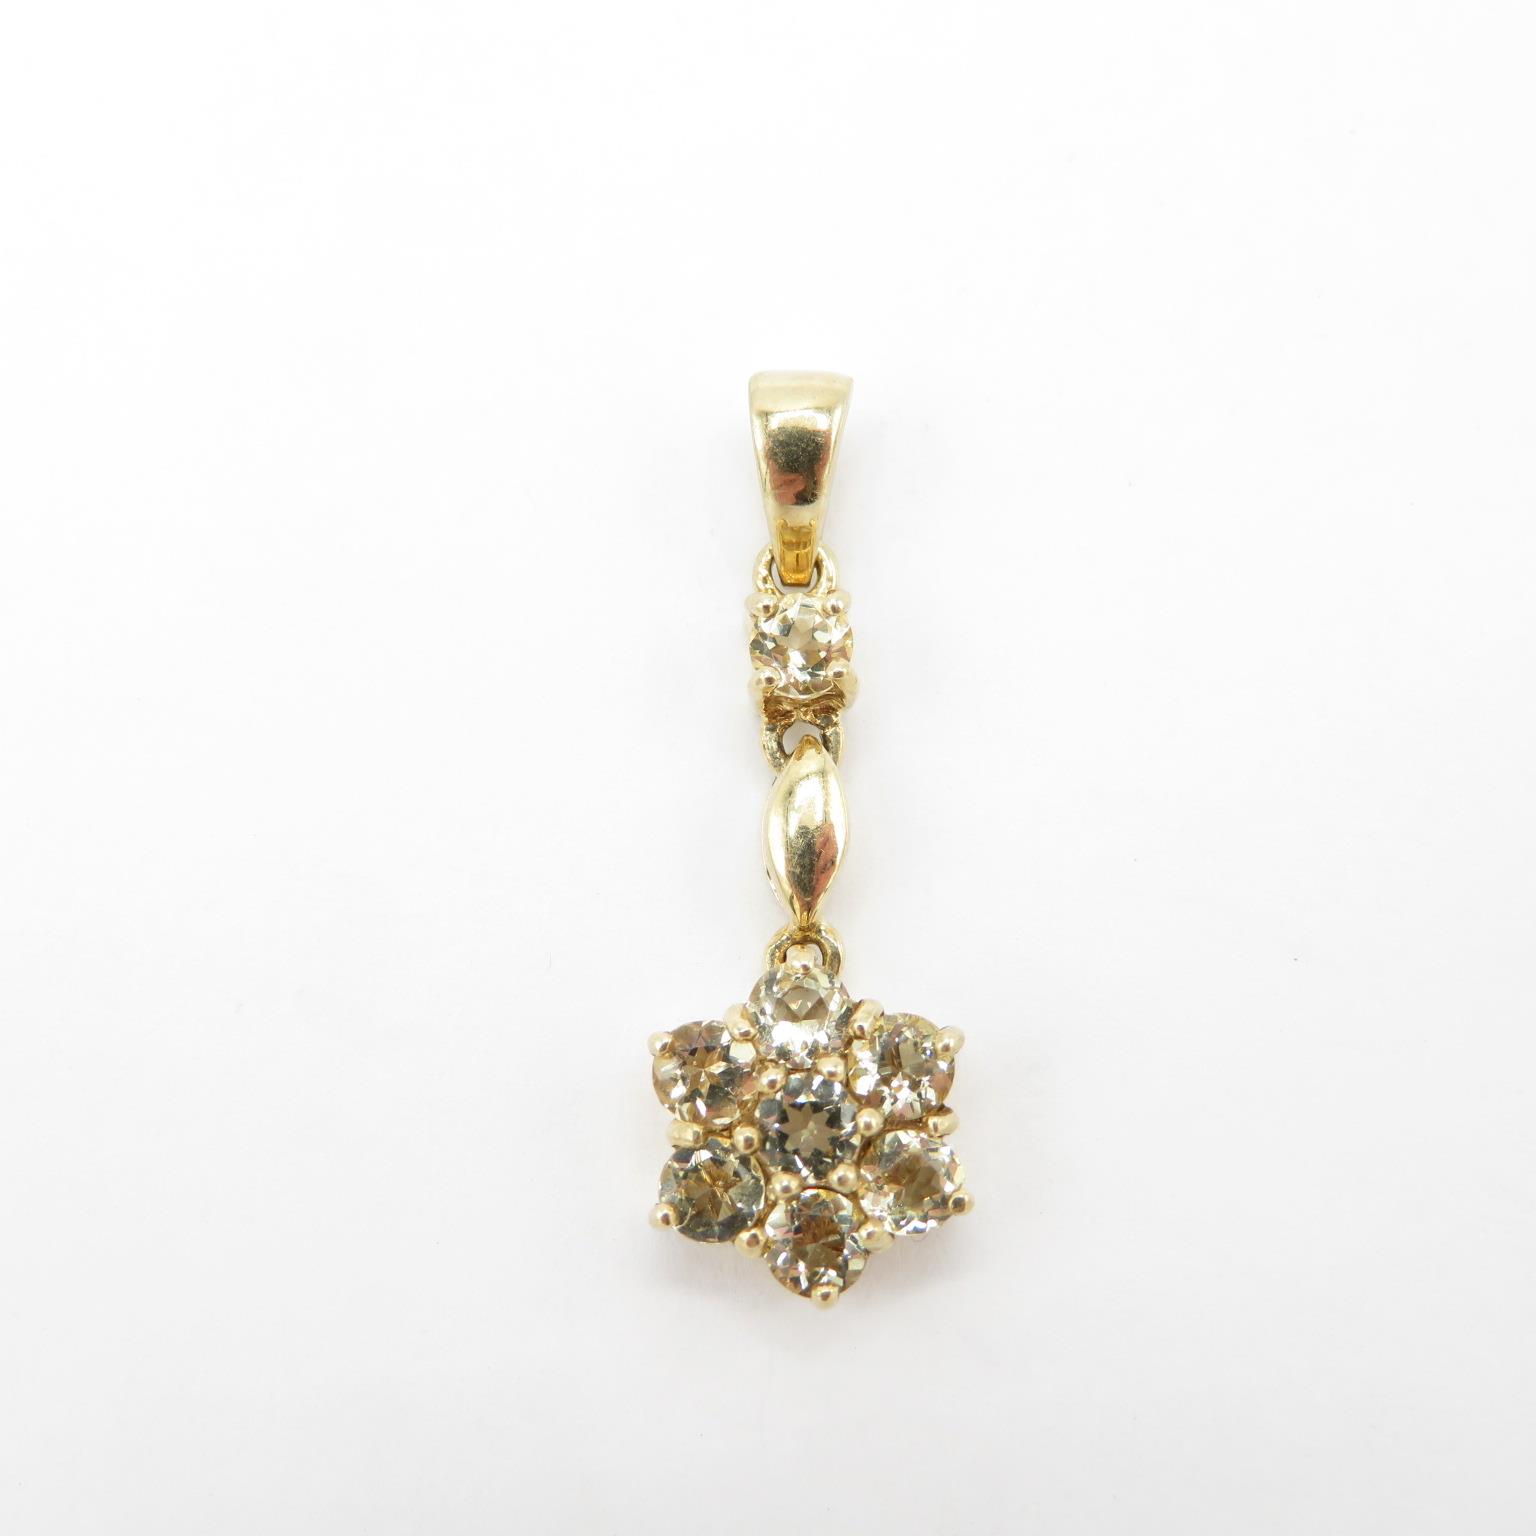 HM 9ct gold pendant with yellow citrine stone floral design (1.9g) - Image 2 of 5